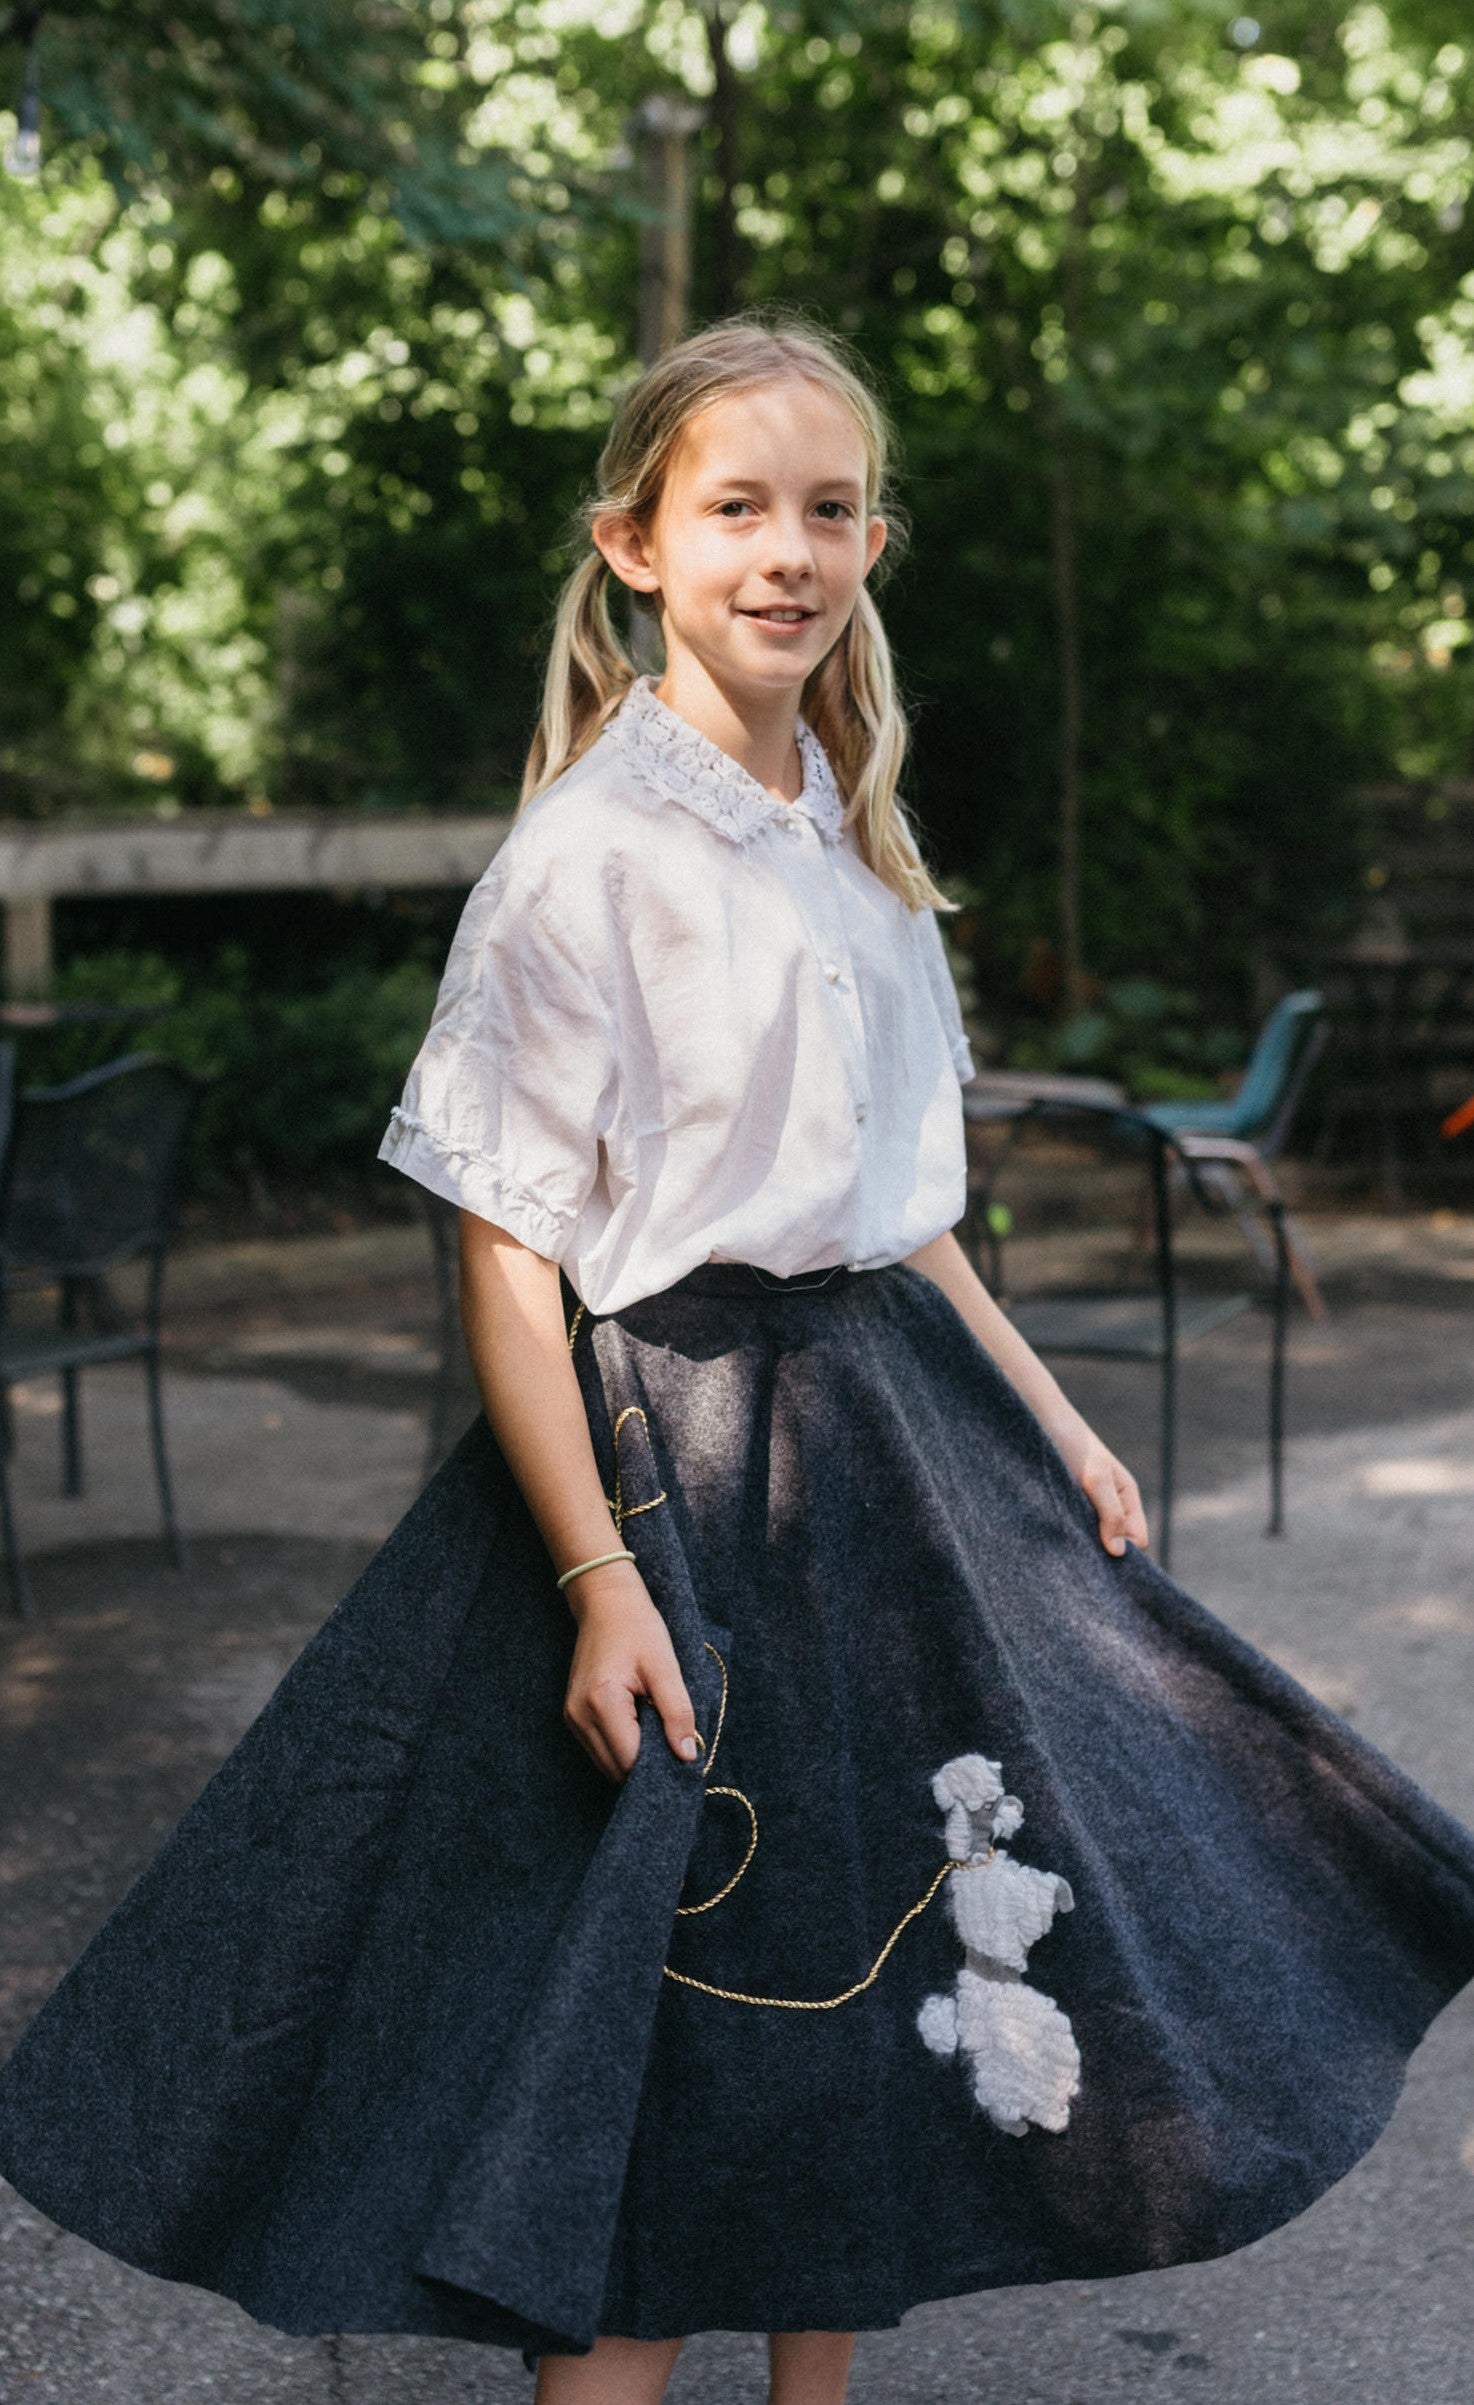 Young blonde girl wearing blouse and skirt of #256 At The Hop surrounded by greenery.